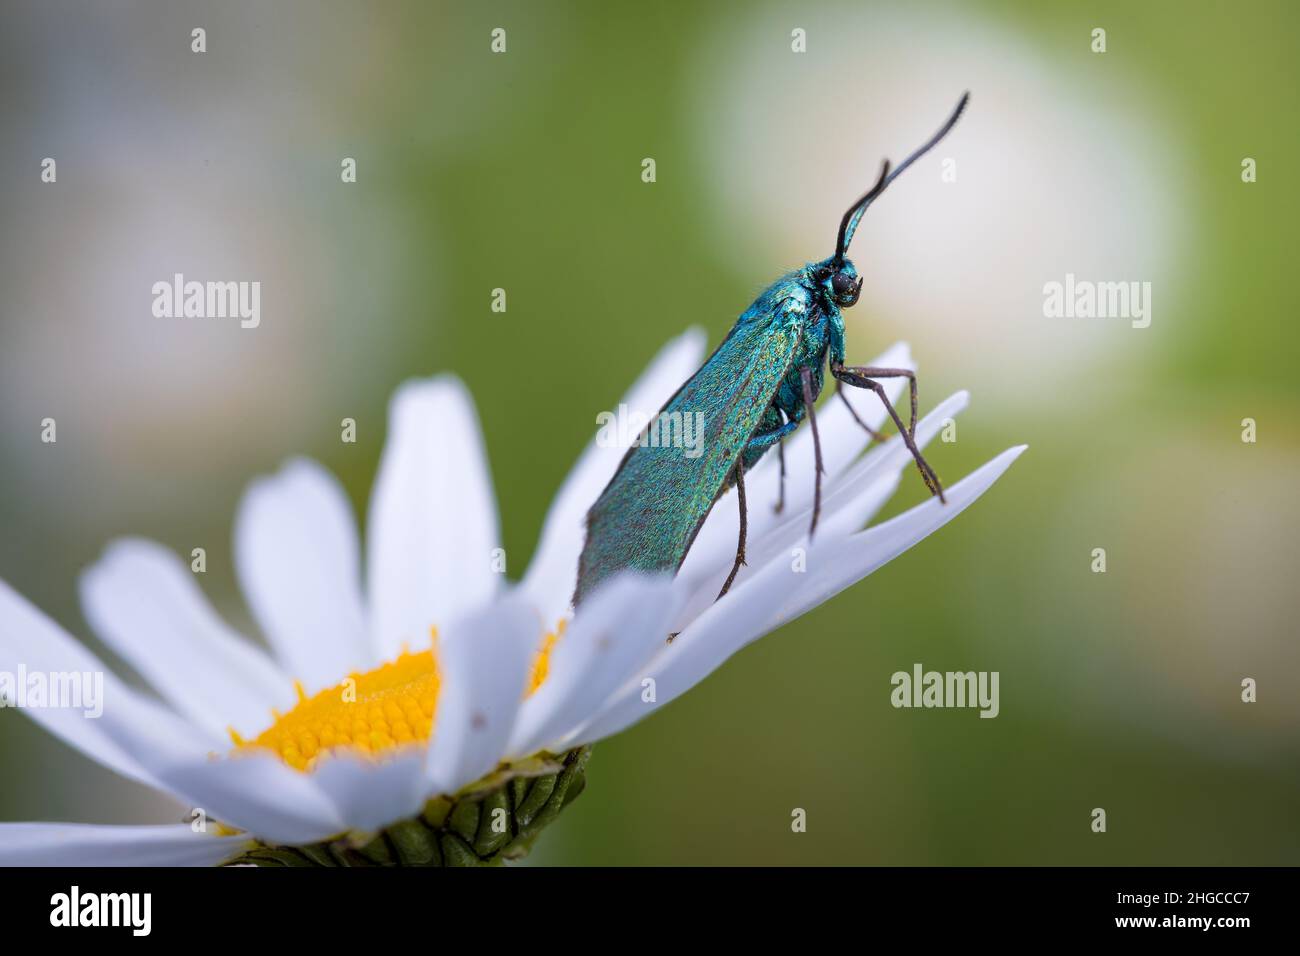 Wonderful world of insects Stock Photo